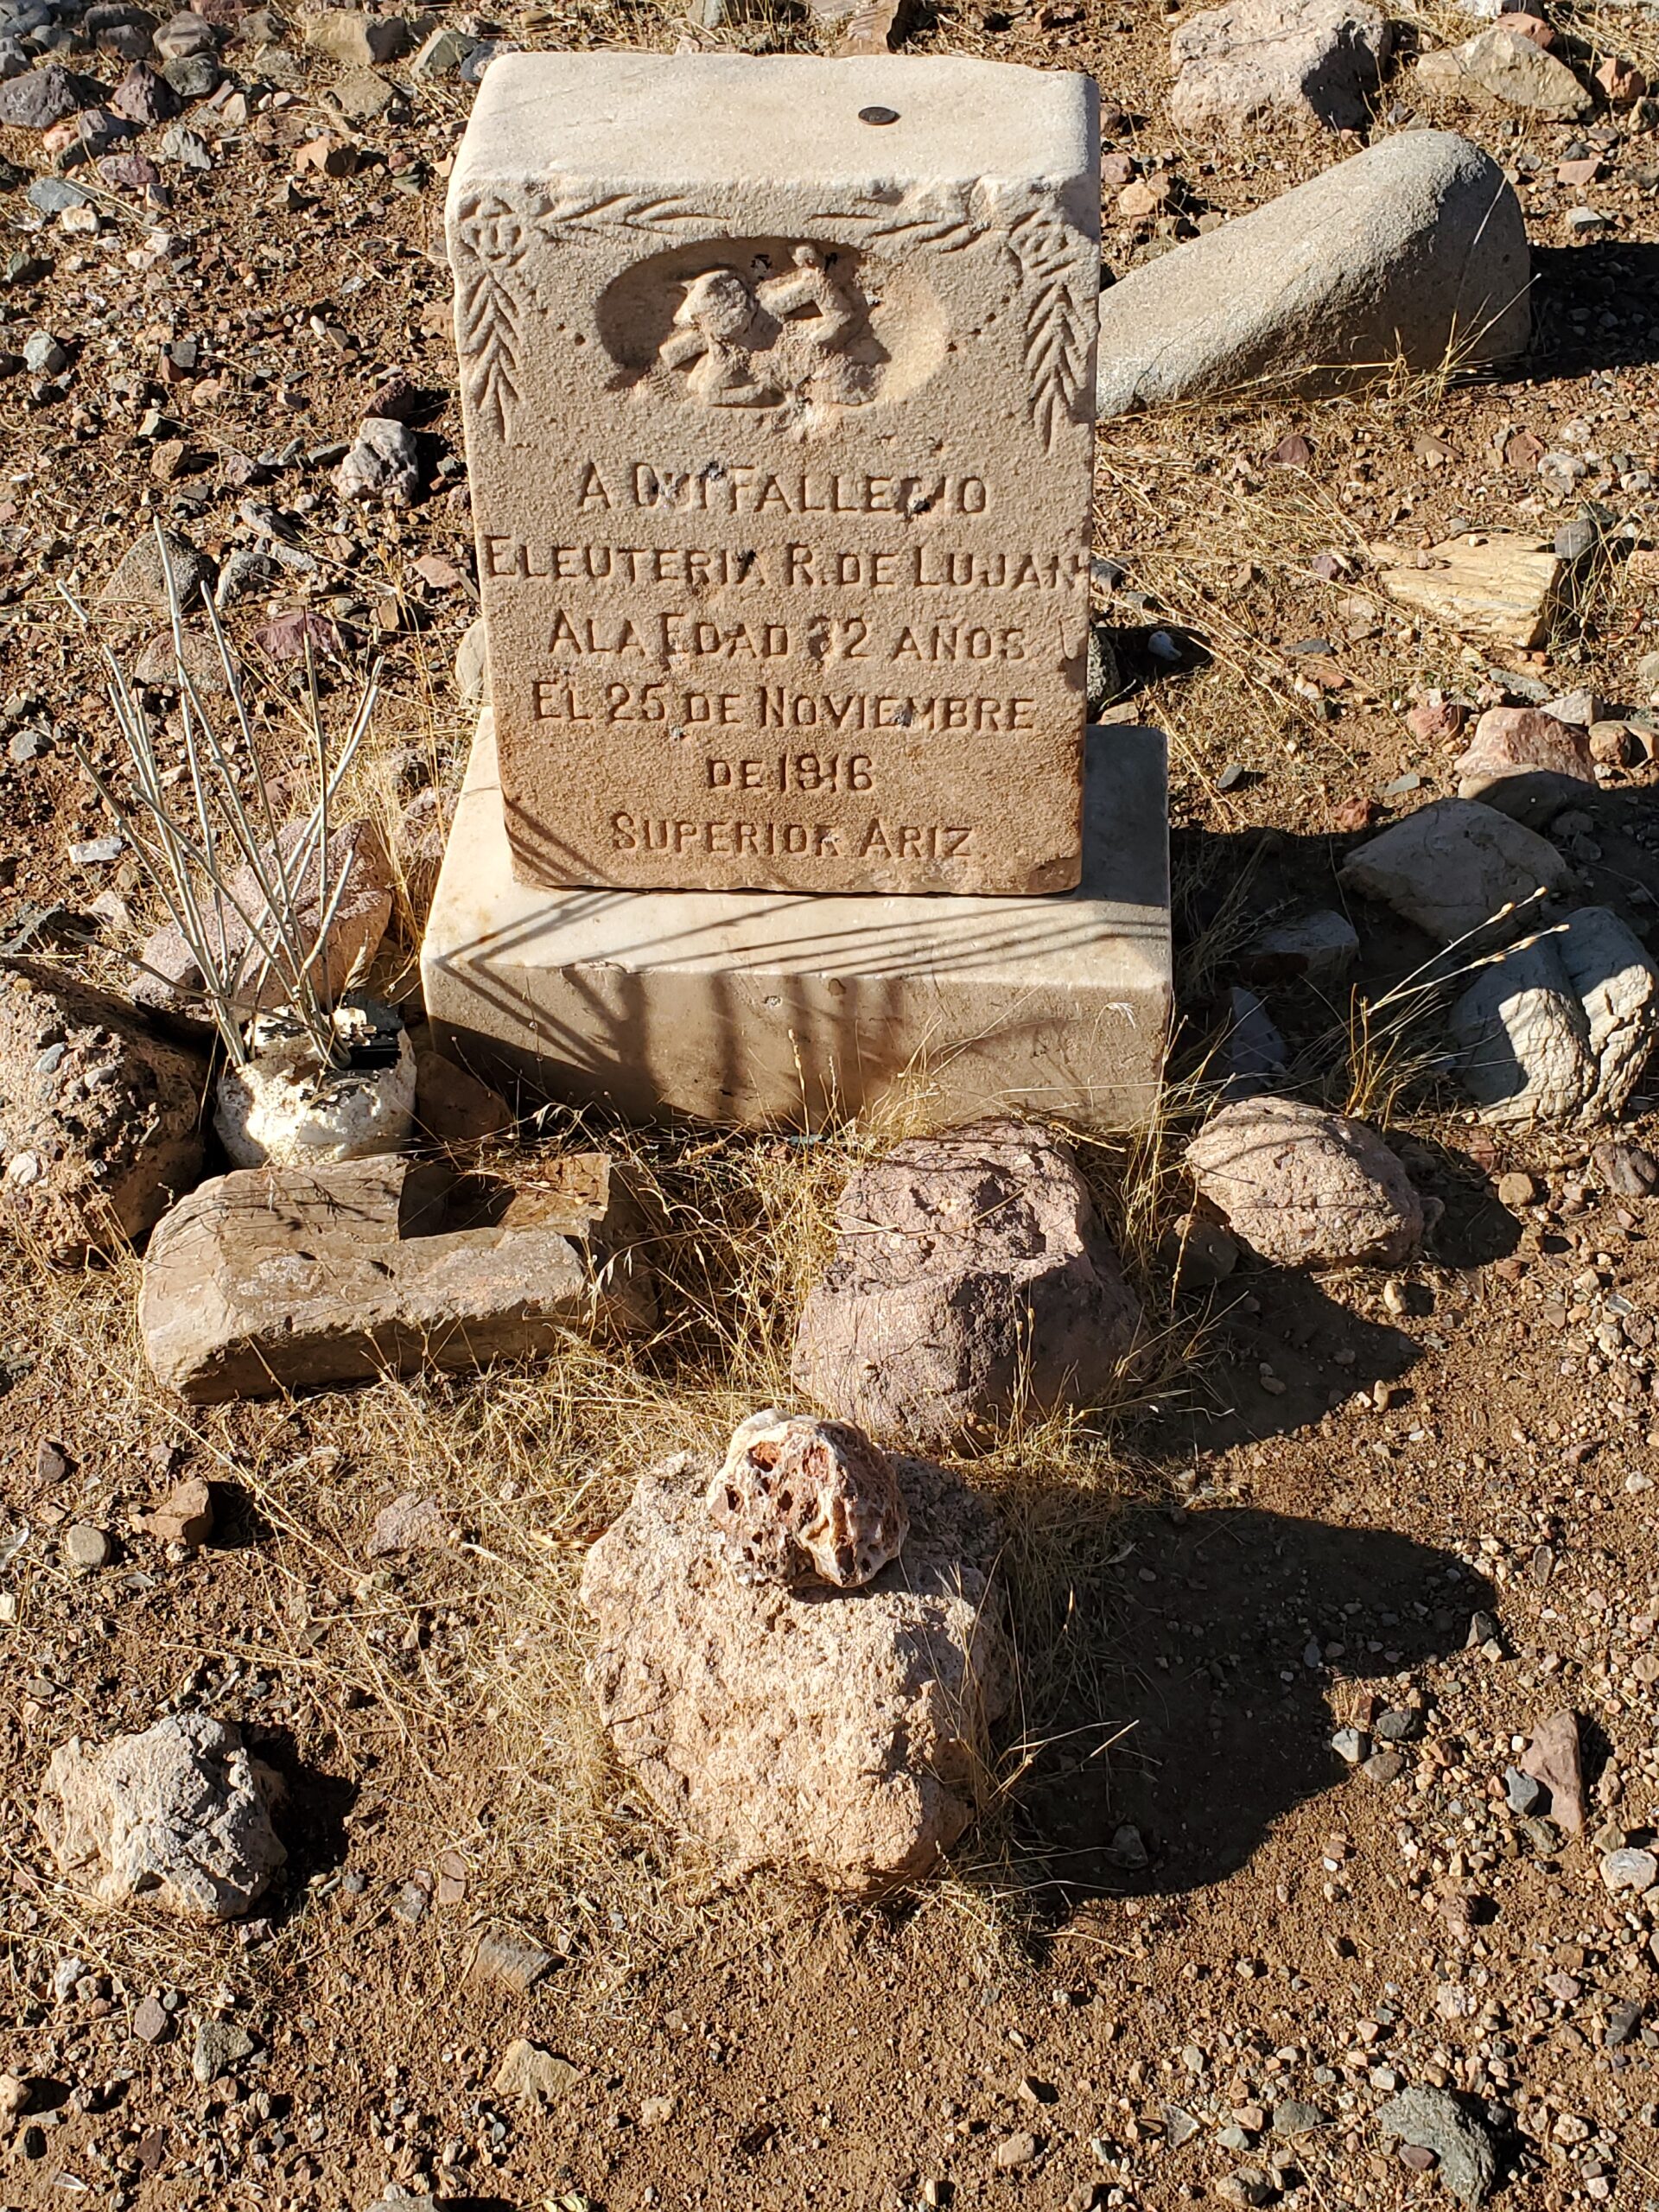 One of the better marked Historic Pinal graves